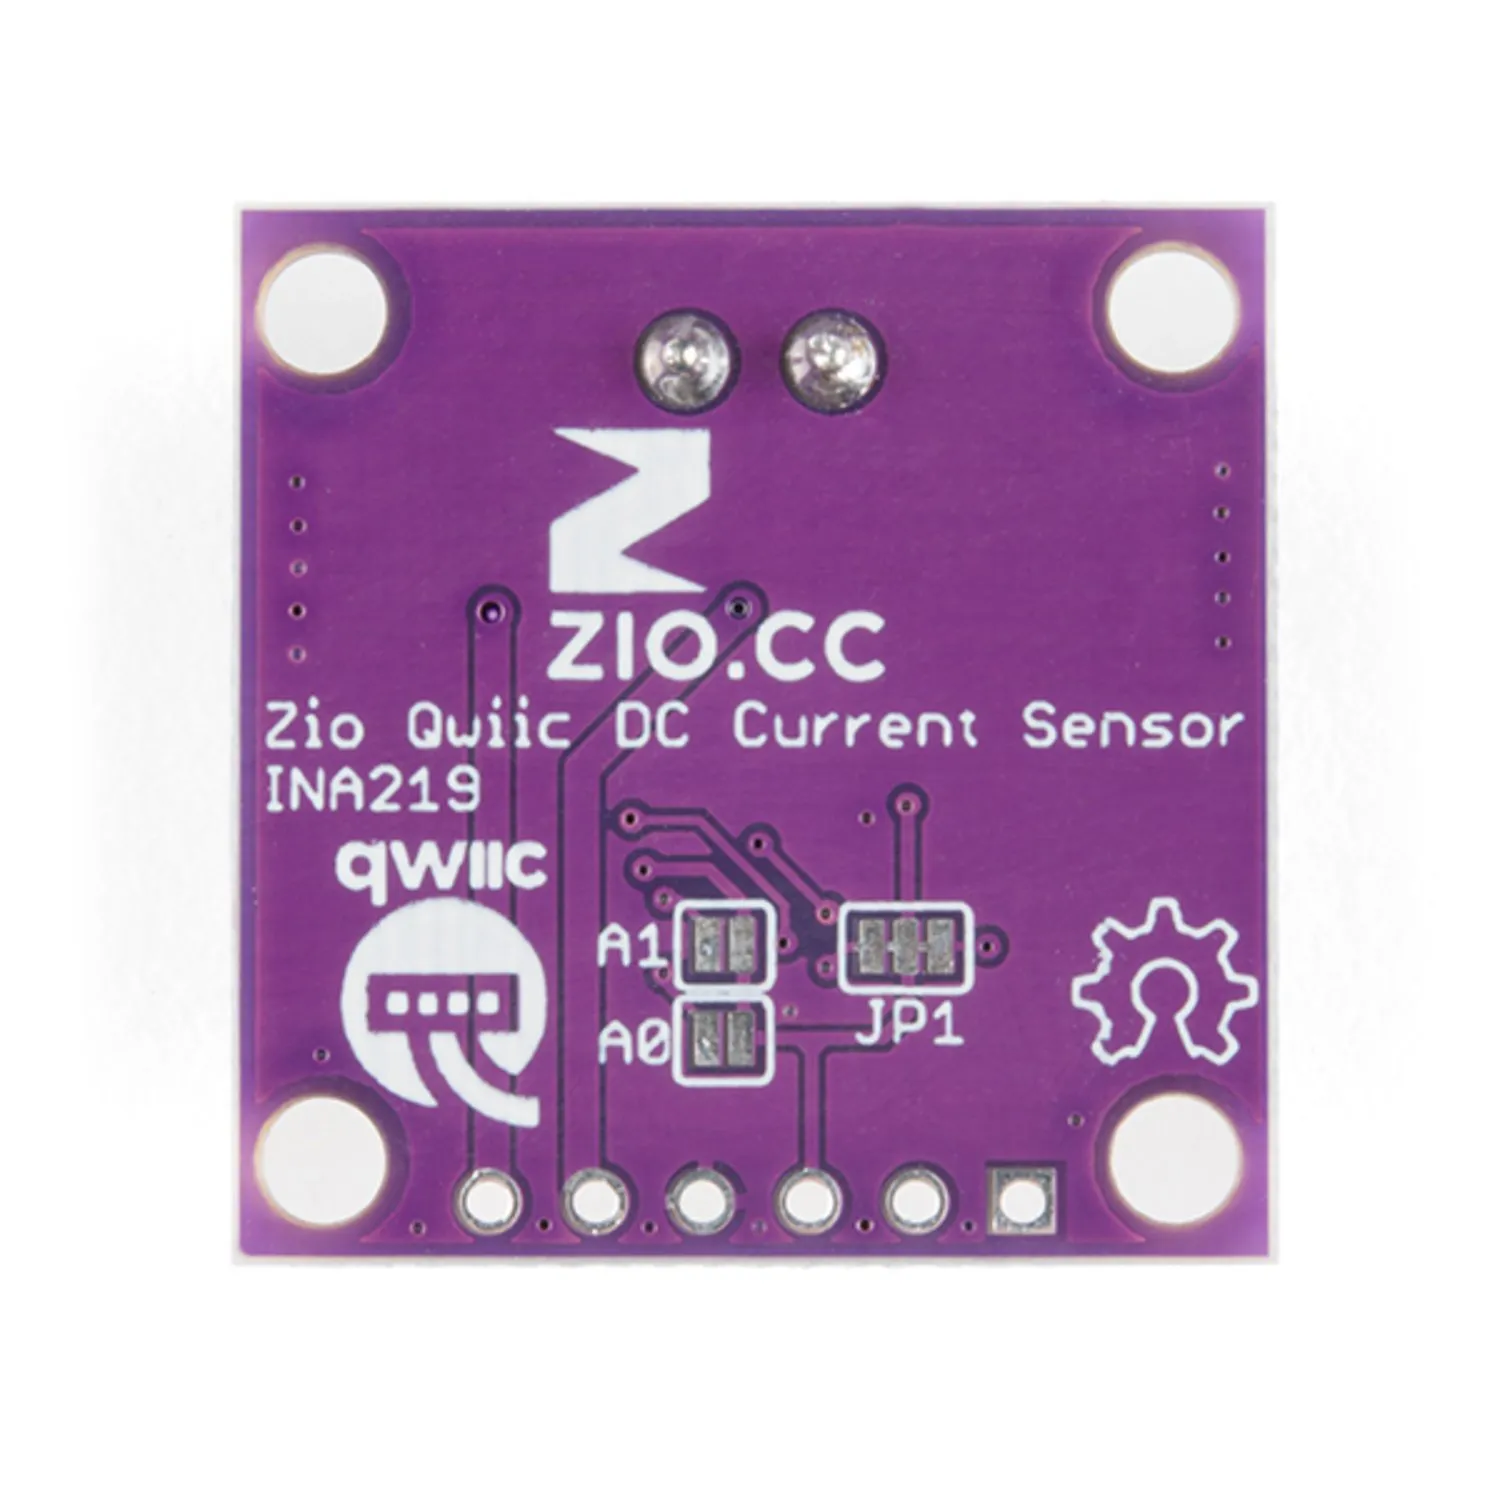 Photo of Zio Current and Voltage Sensor - INA219 (Qwiic)